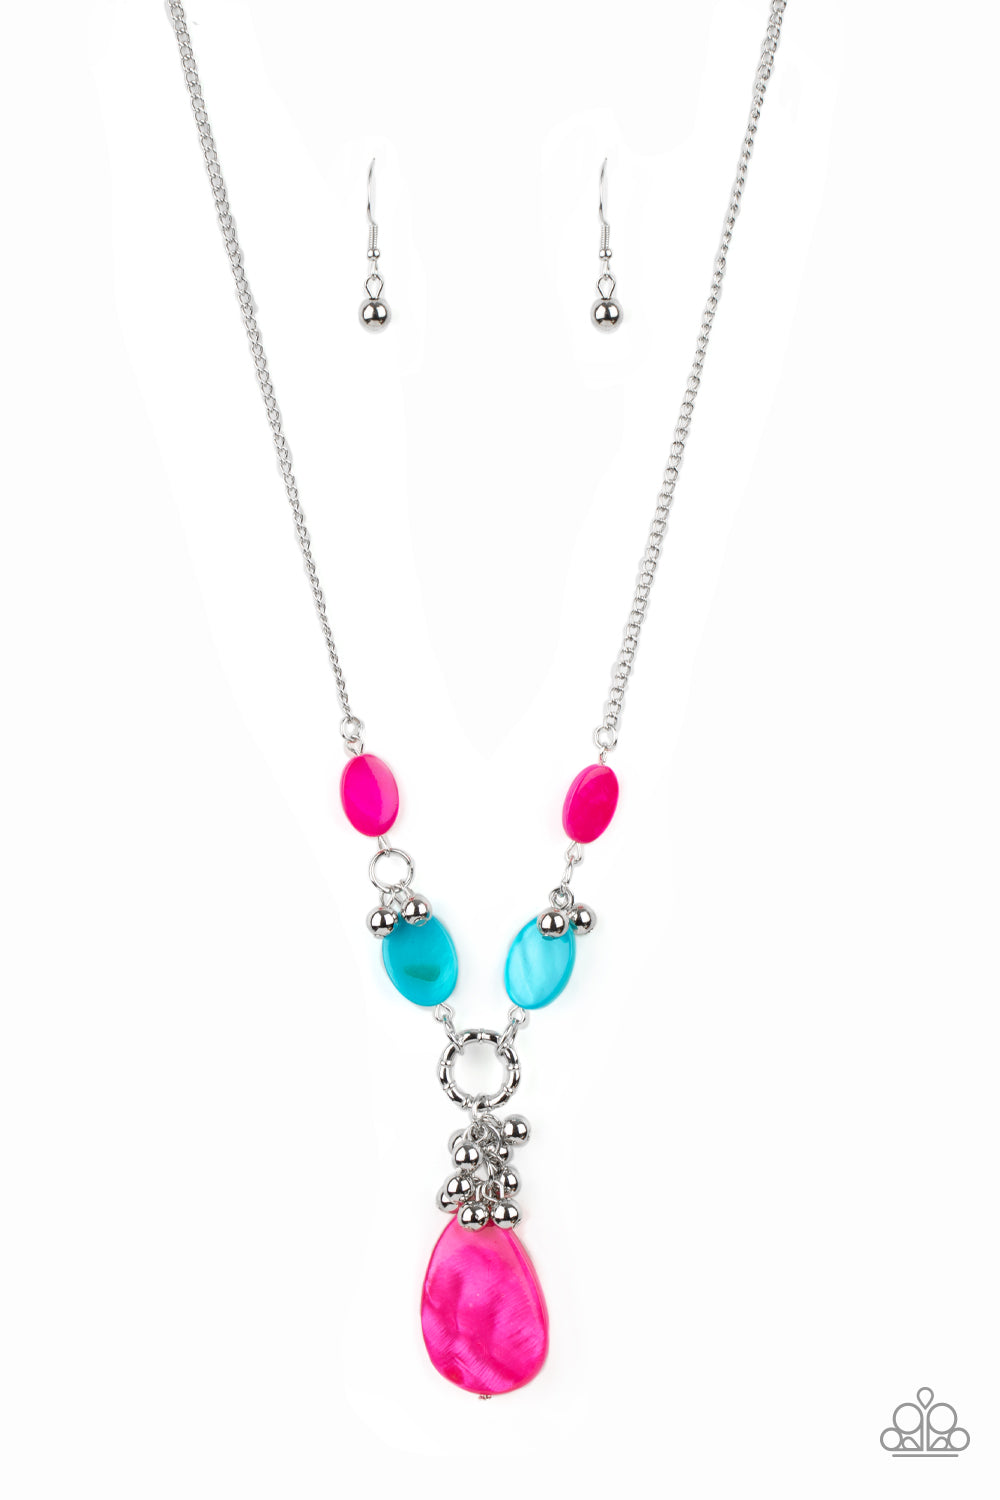 Summer Idol - Multi Color Pink and Blue Necklace - Paparazzi Accessories